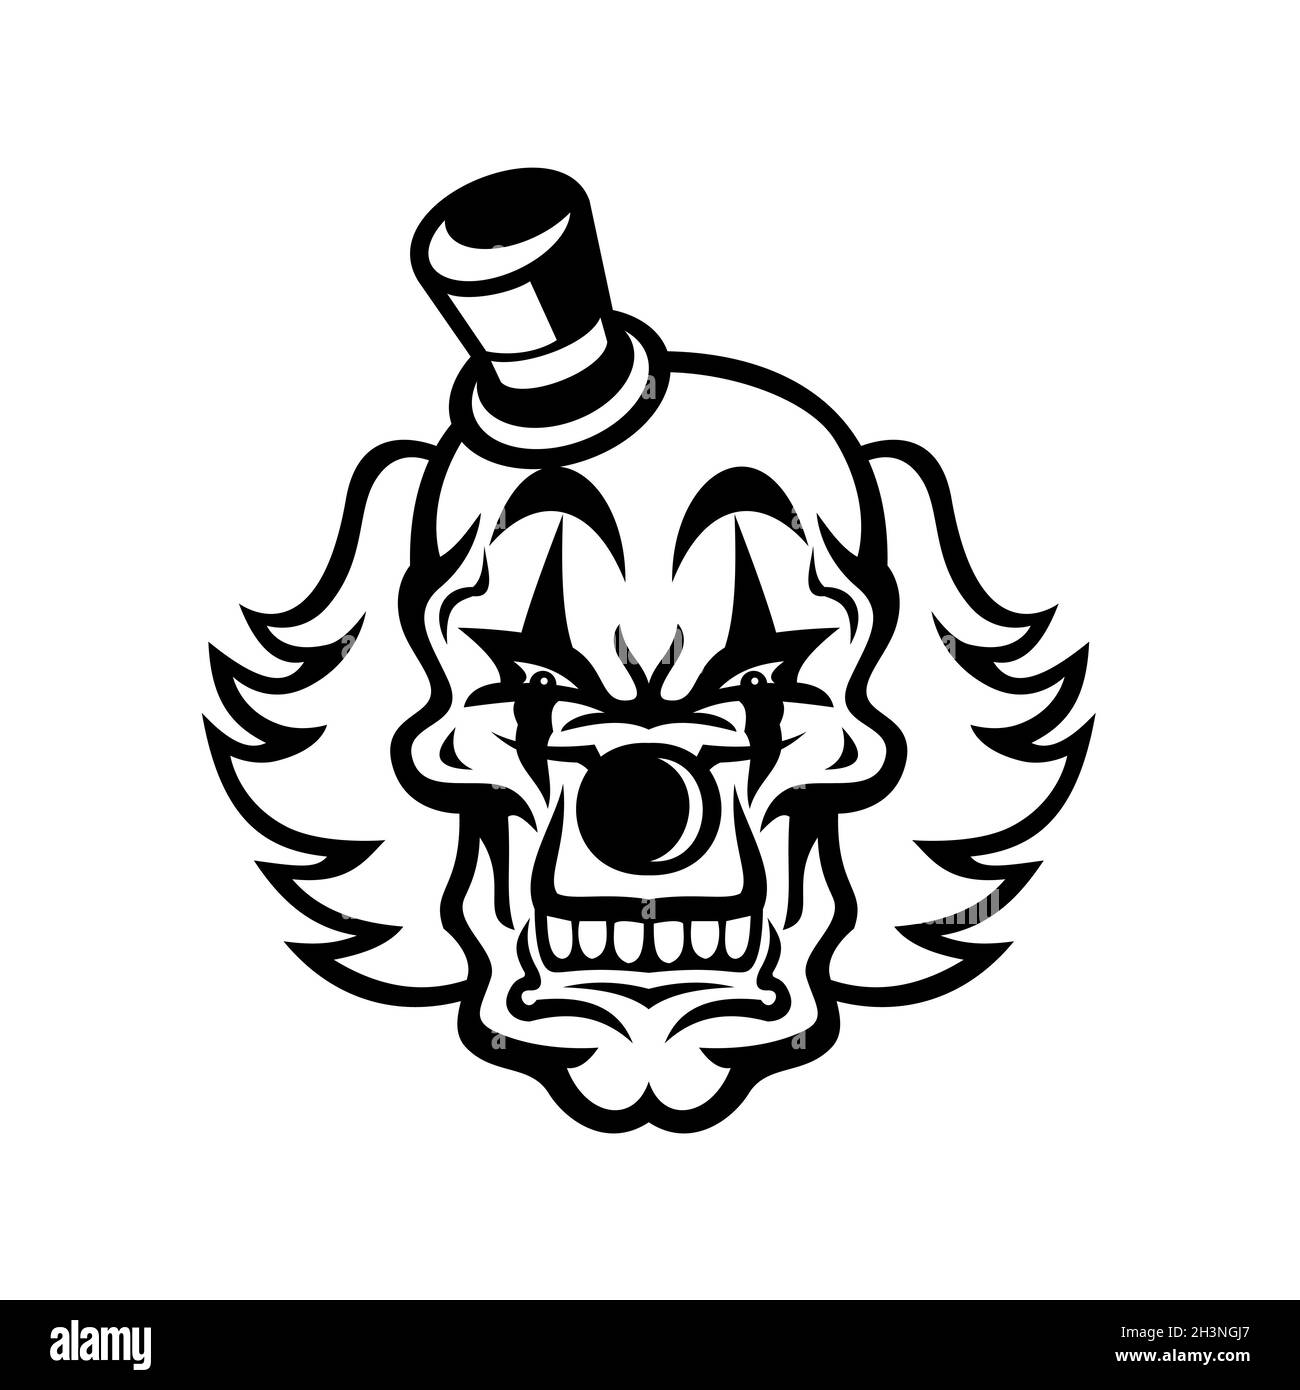 Head of Scary and Evil Whiteface Clown Skull Front View Mascot Black and White Stock Photo